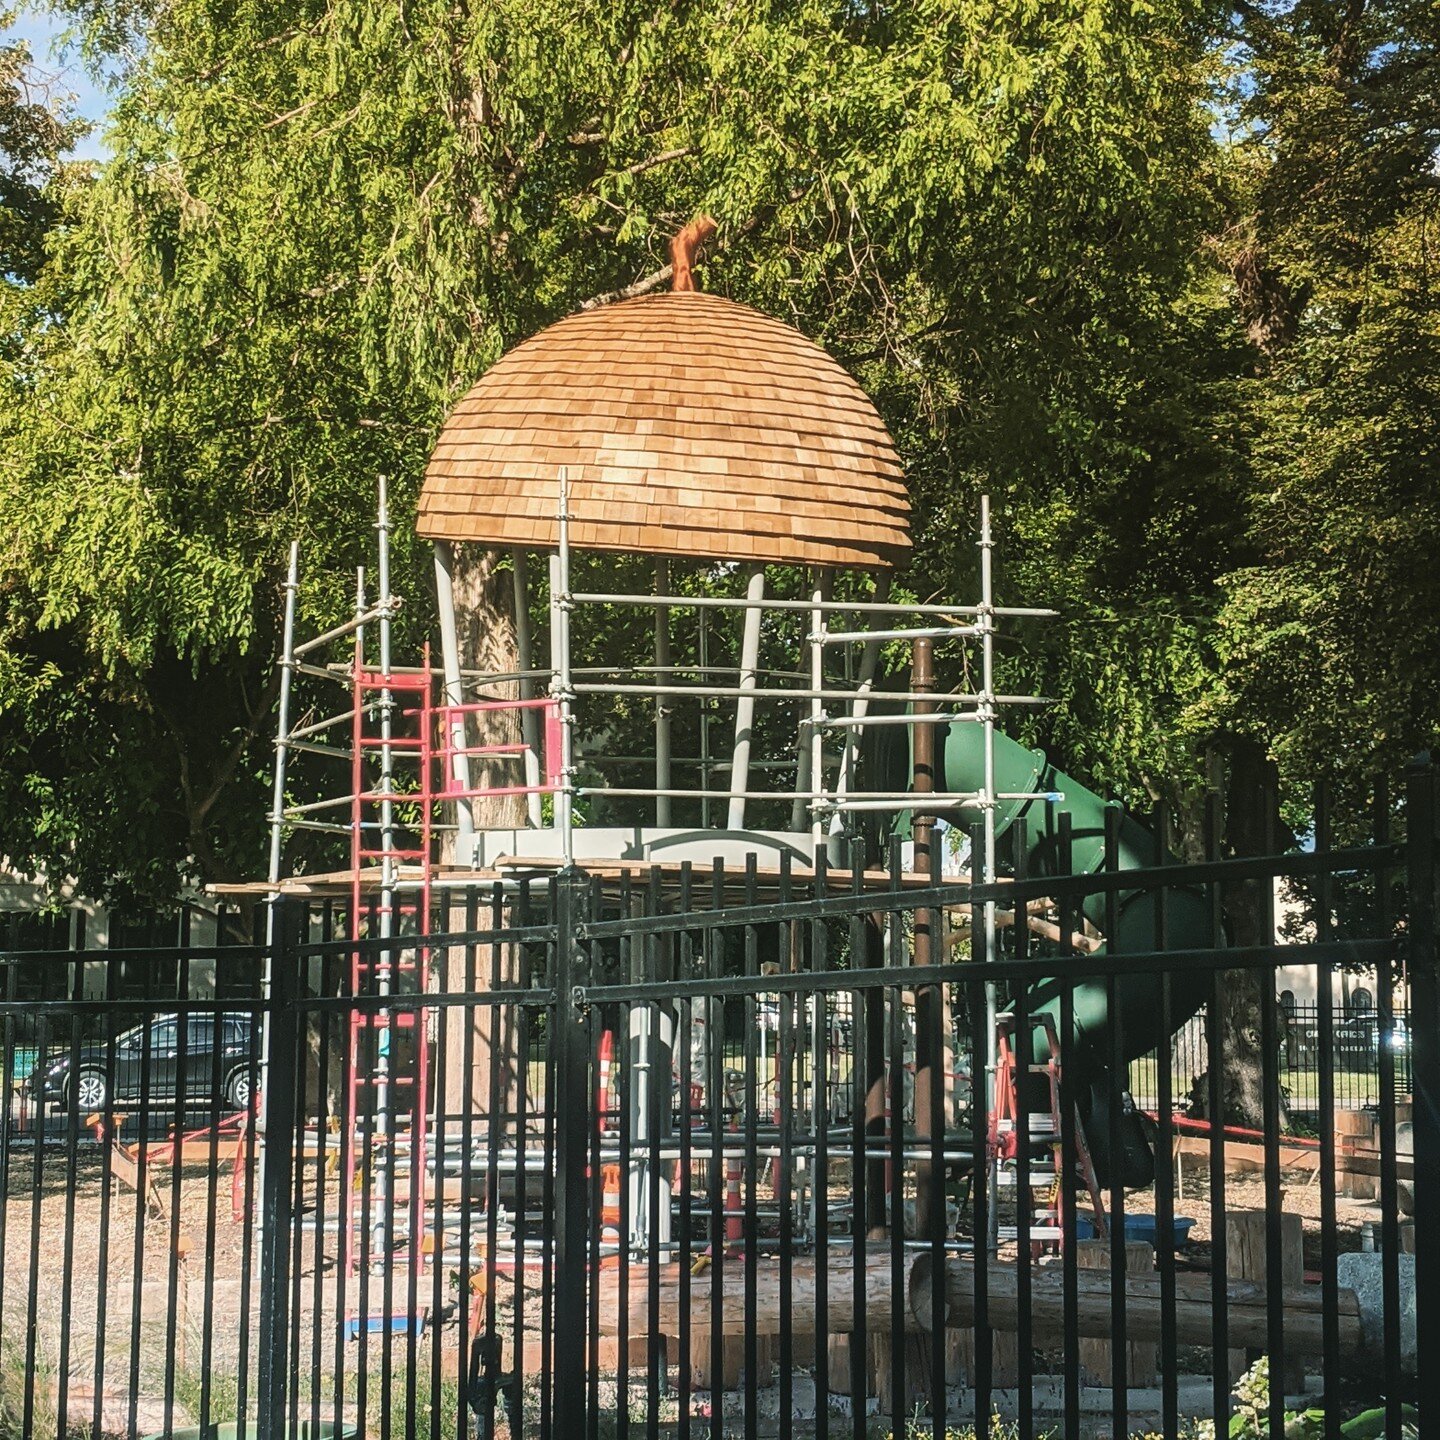 The acorn roof of the tree house is up at The Children's Museum of Southern Oregon!